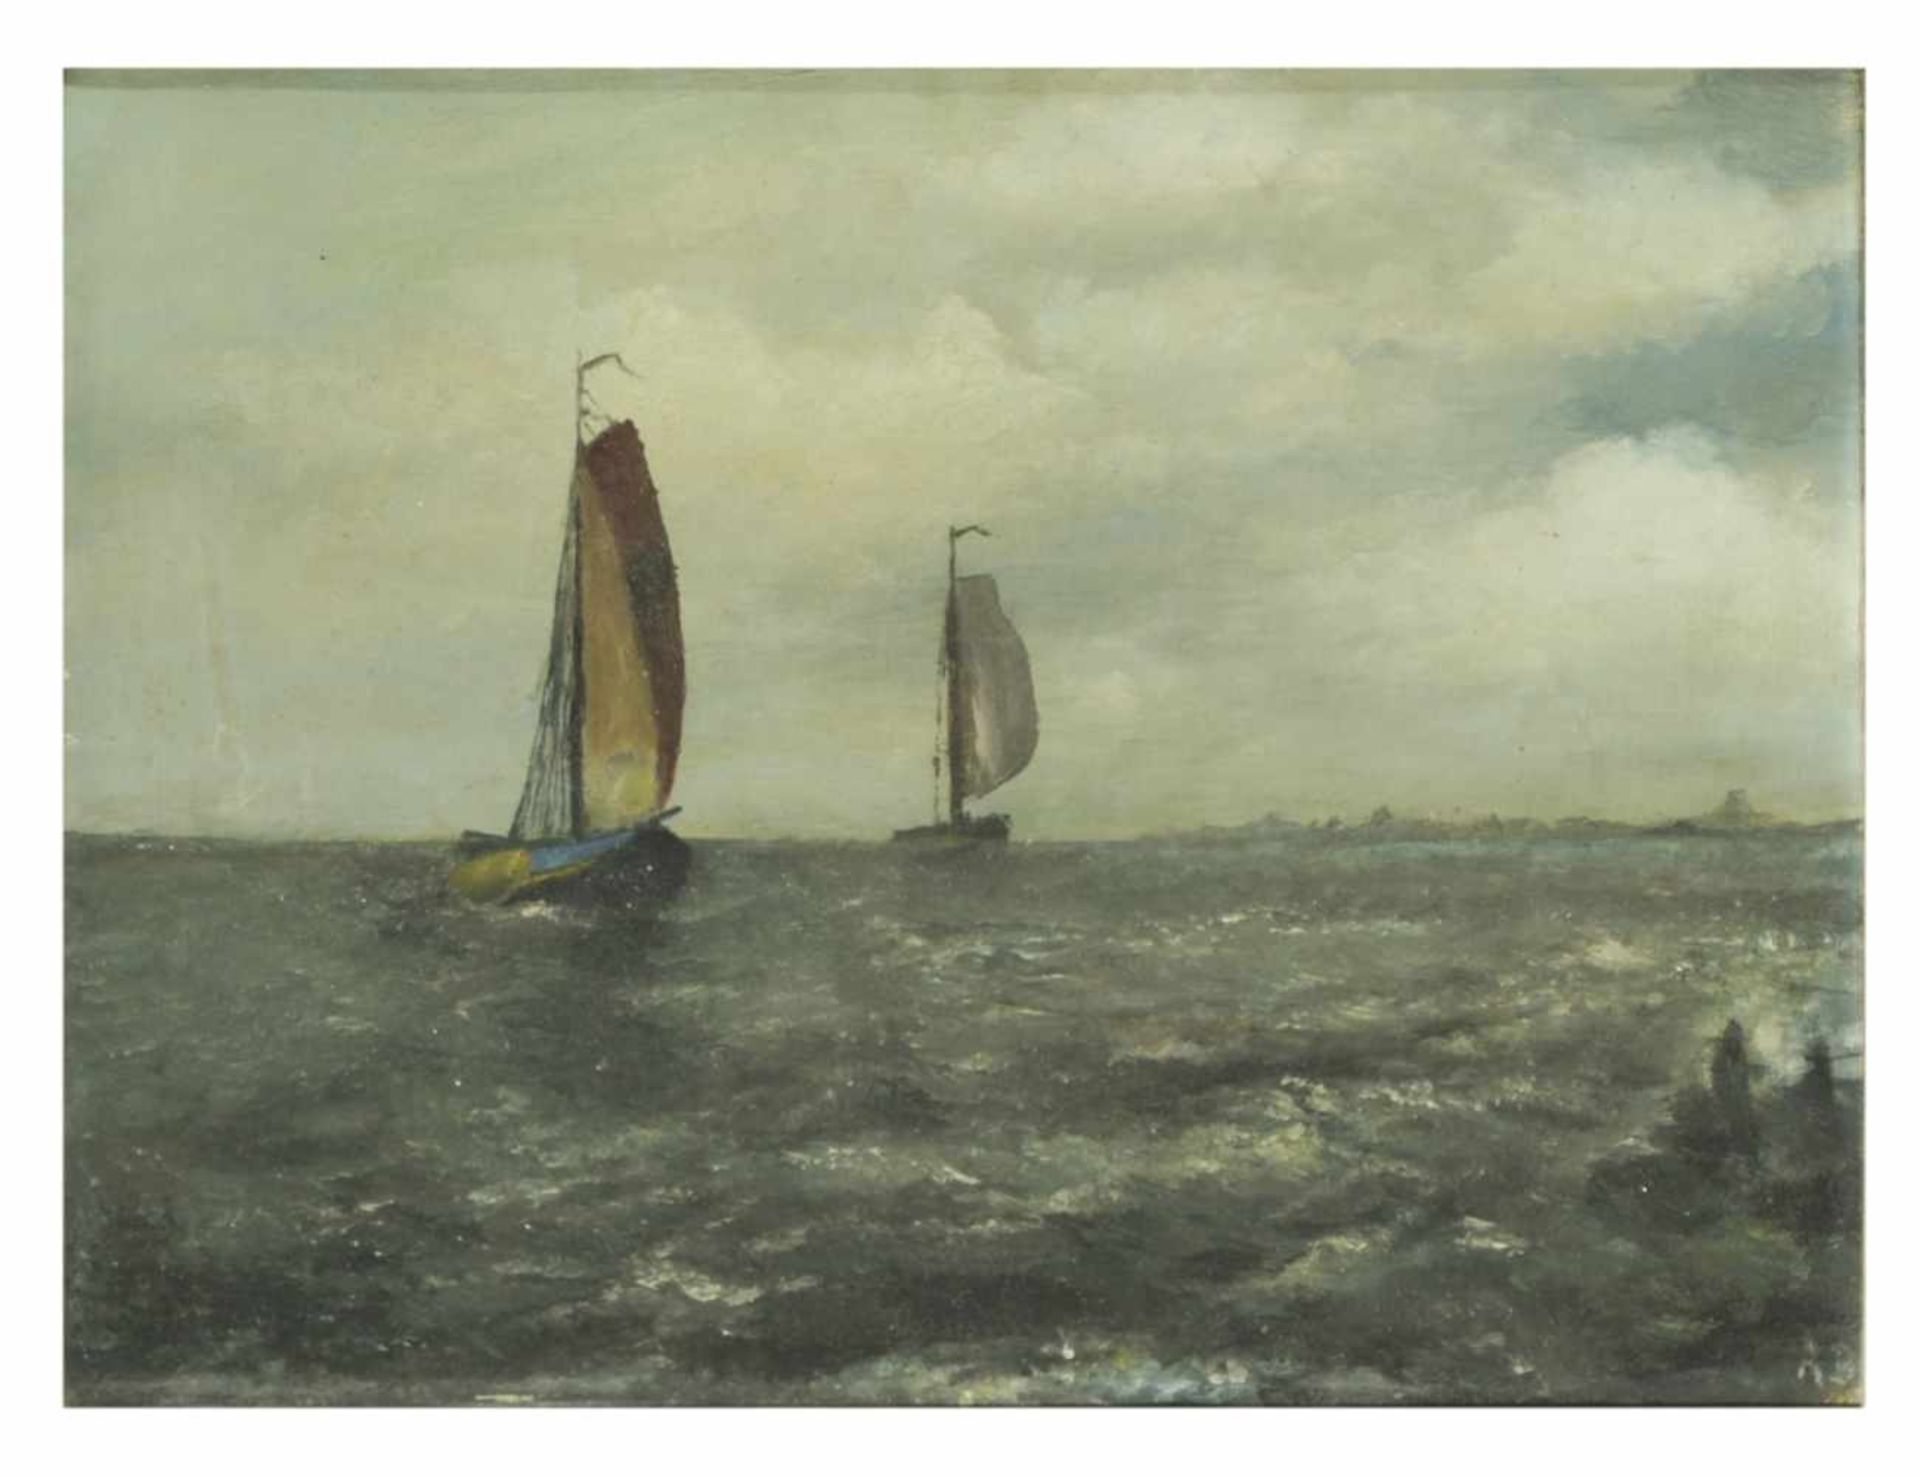 Monogramist A.B., Boats on the sea, probably Netherlands, oil on canvas, 20th c., 30 x 40